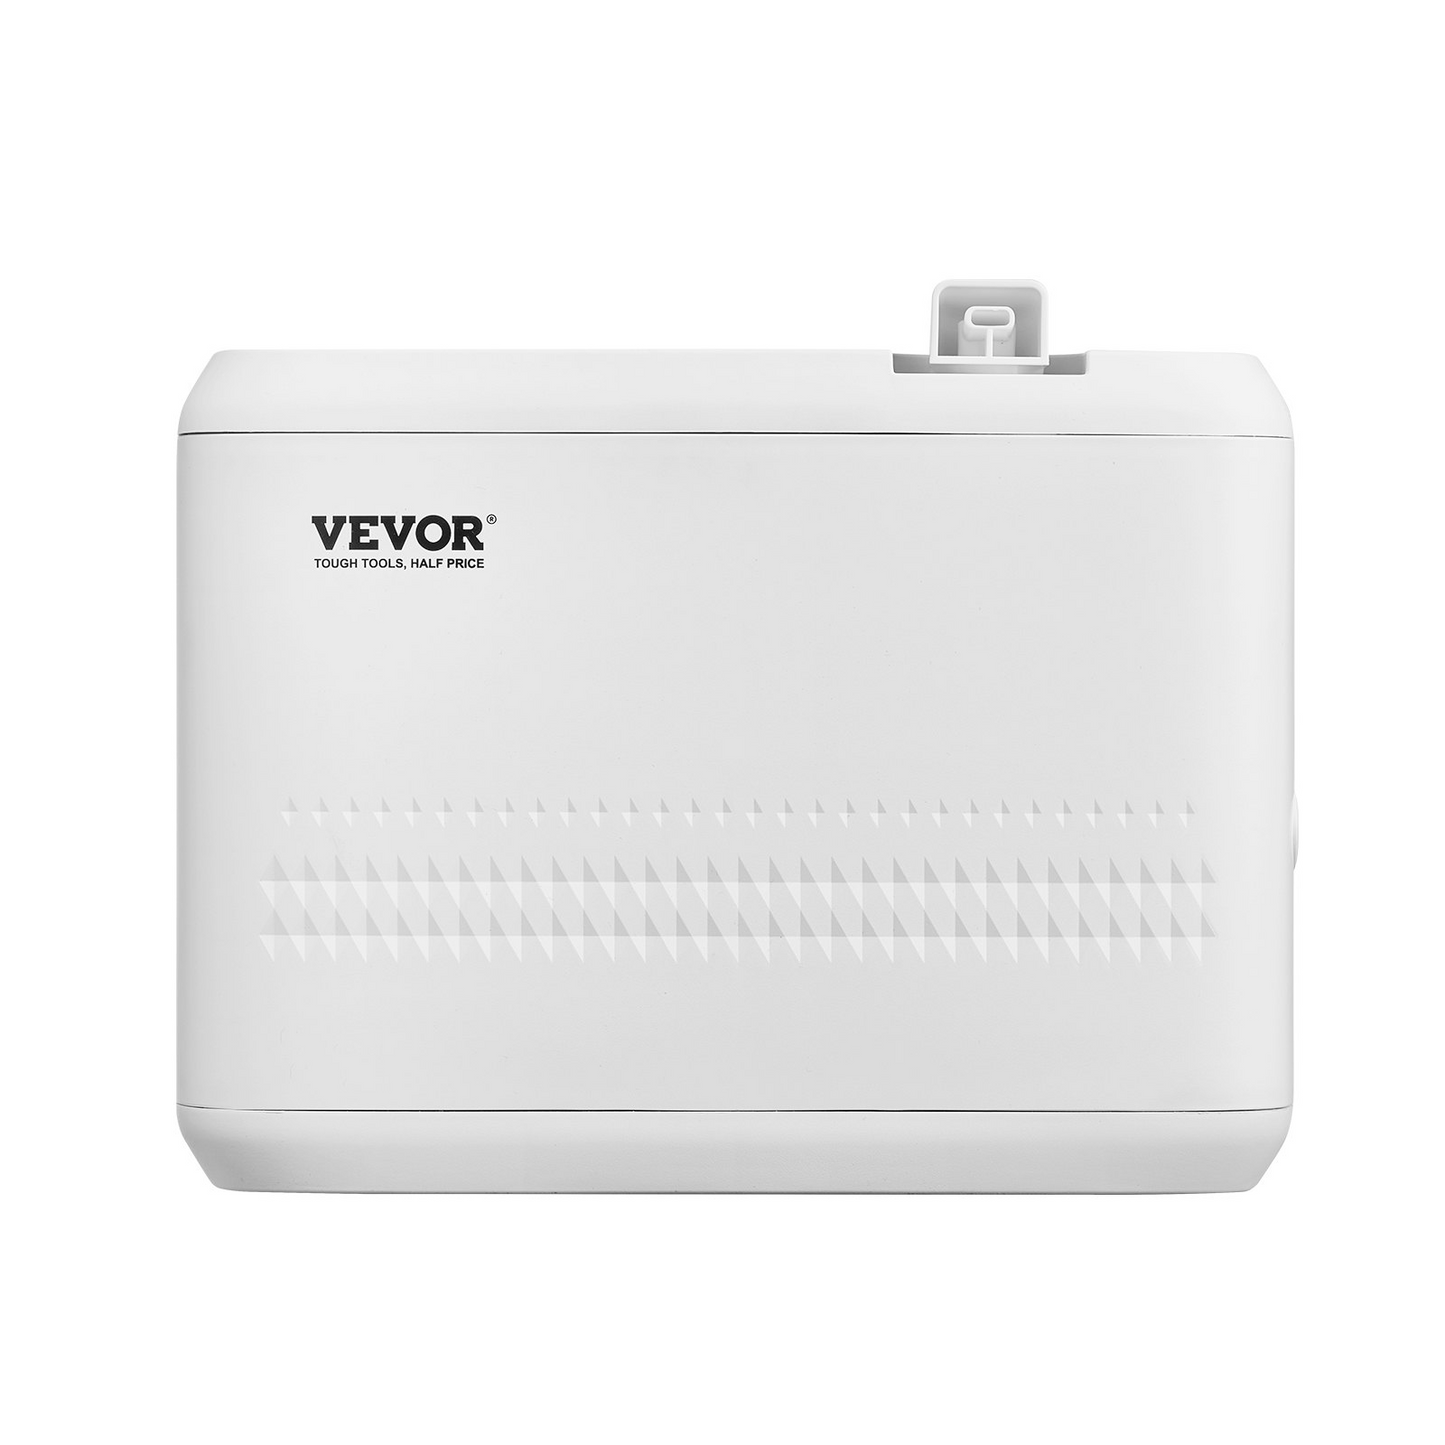 VEVOR Upgrade HVAC Scent Diffuser for Whole House, 850ML Scent Air Machine with Cold Air Technology, Waterless Essential Oil Diffuser, Cover Up to 5000 Sq.Ft for Large Room, Hotel, Spa, Office, Goodies N Stuff